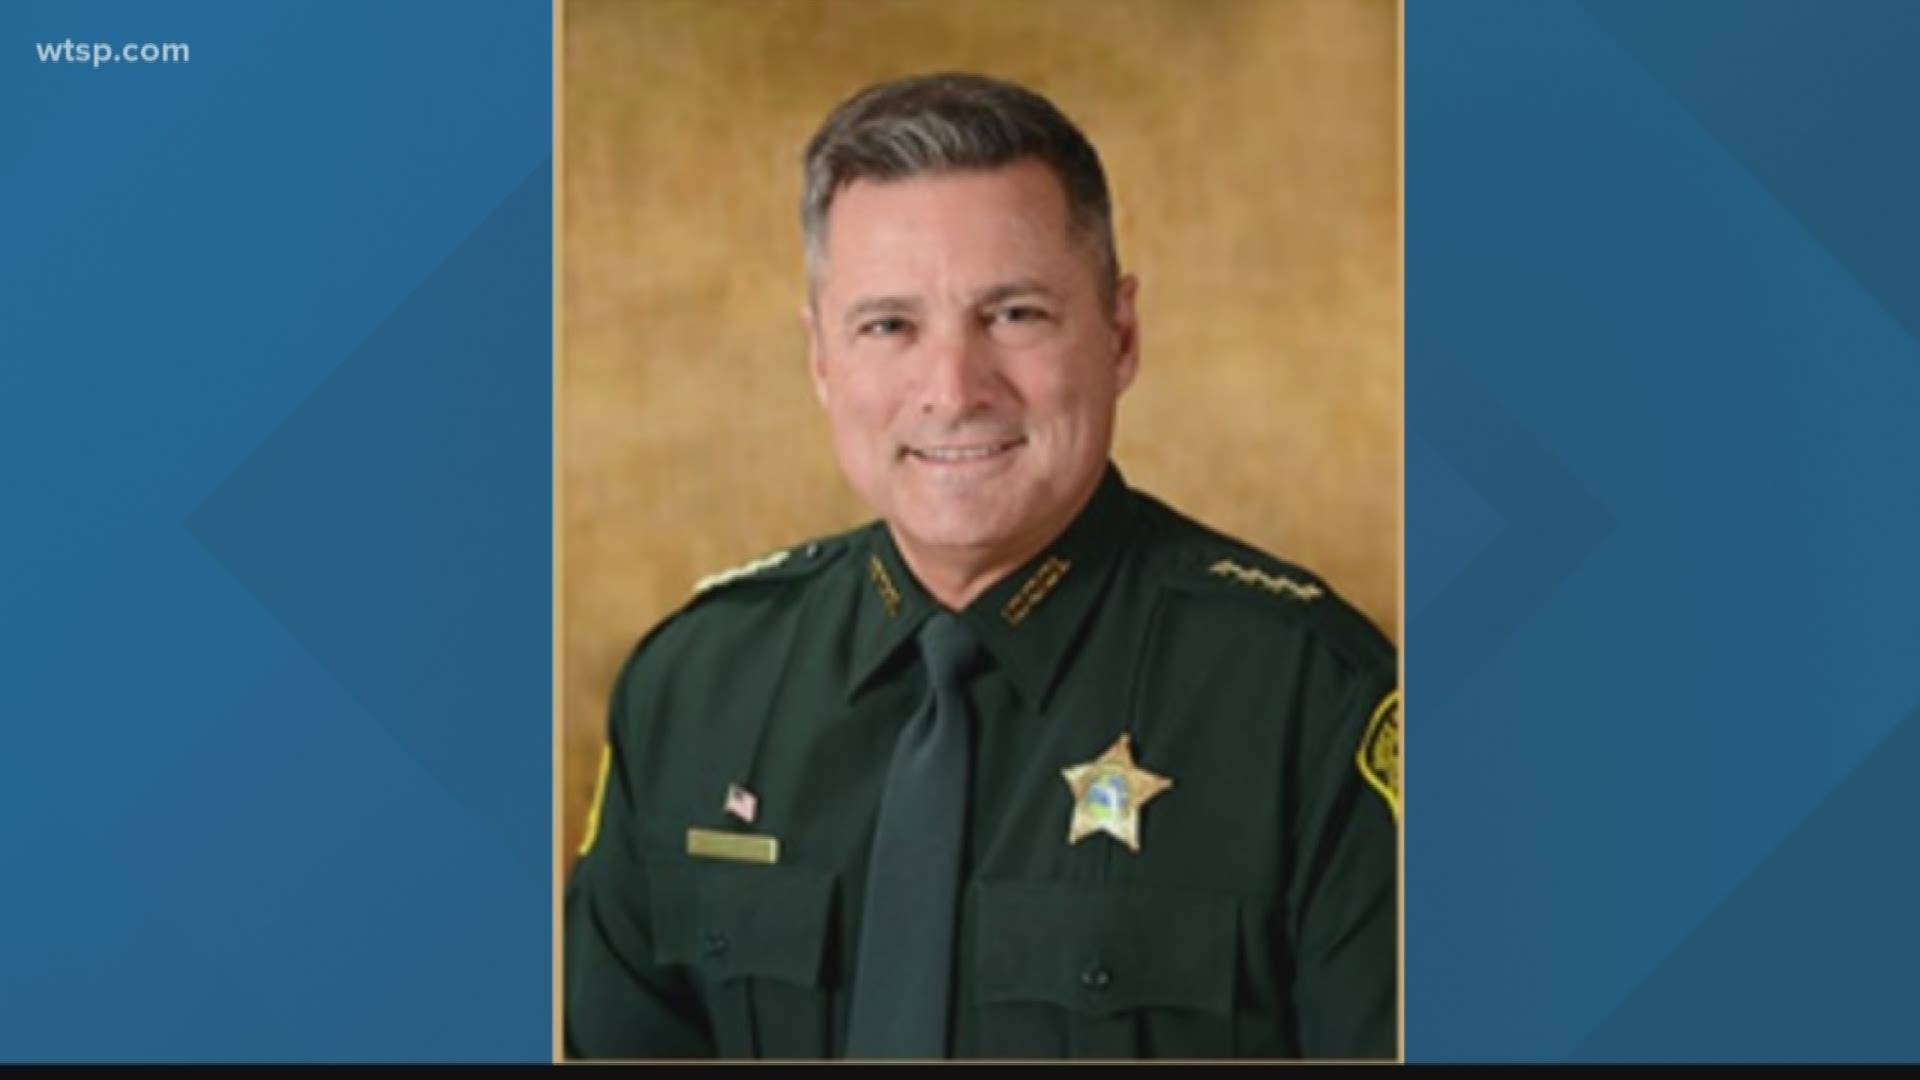 The sheriff of Citrus County struck and killed a pedestrian Wednesday night in Hernando County.

Investigators say Sheriff Mike Prendergast, 62, was driving his agency car northbound on US-19, south of Woodland Water Boulevard, in the outside lane, when a pedestrian walked into the car's path.

Prendergast struck the person, who died.